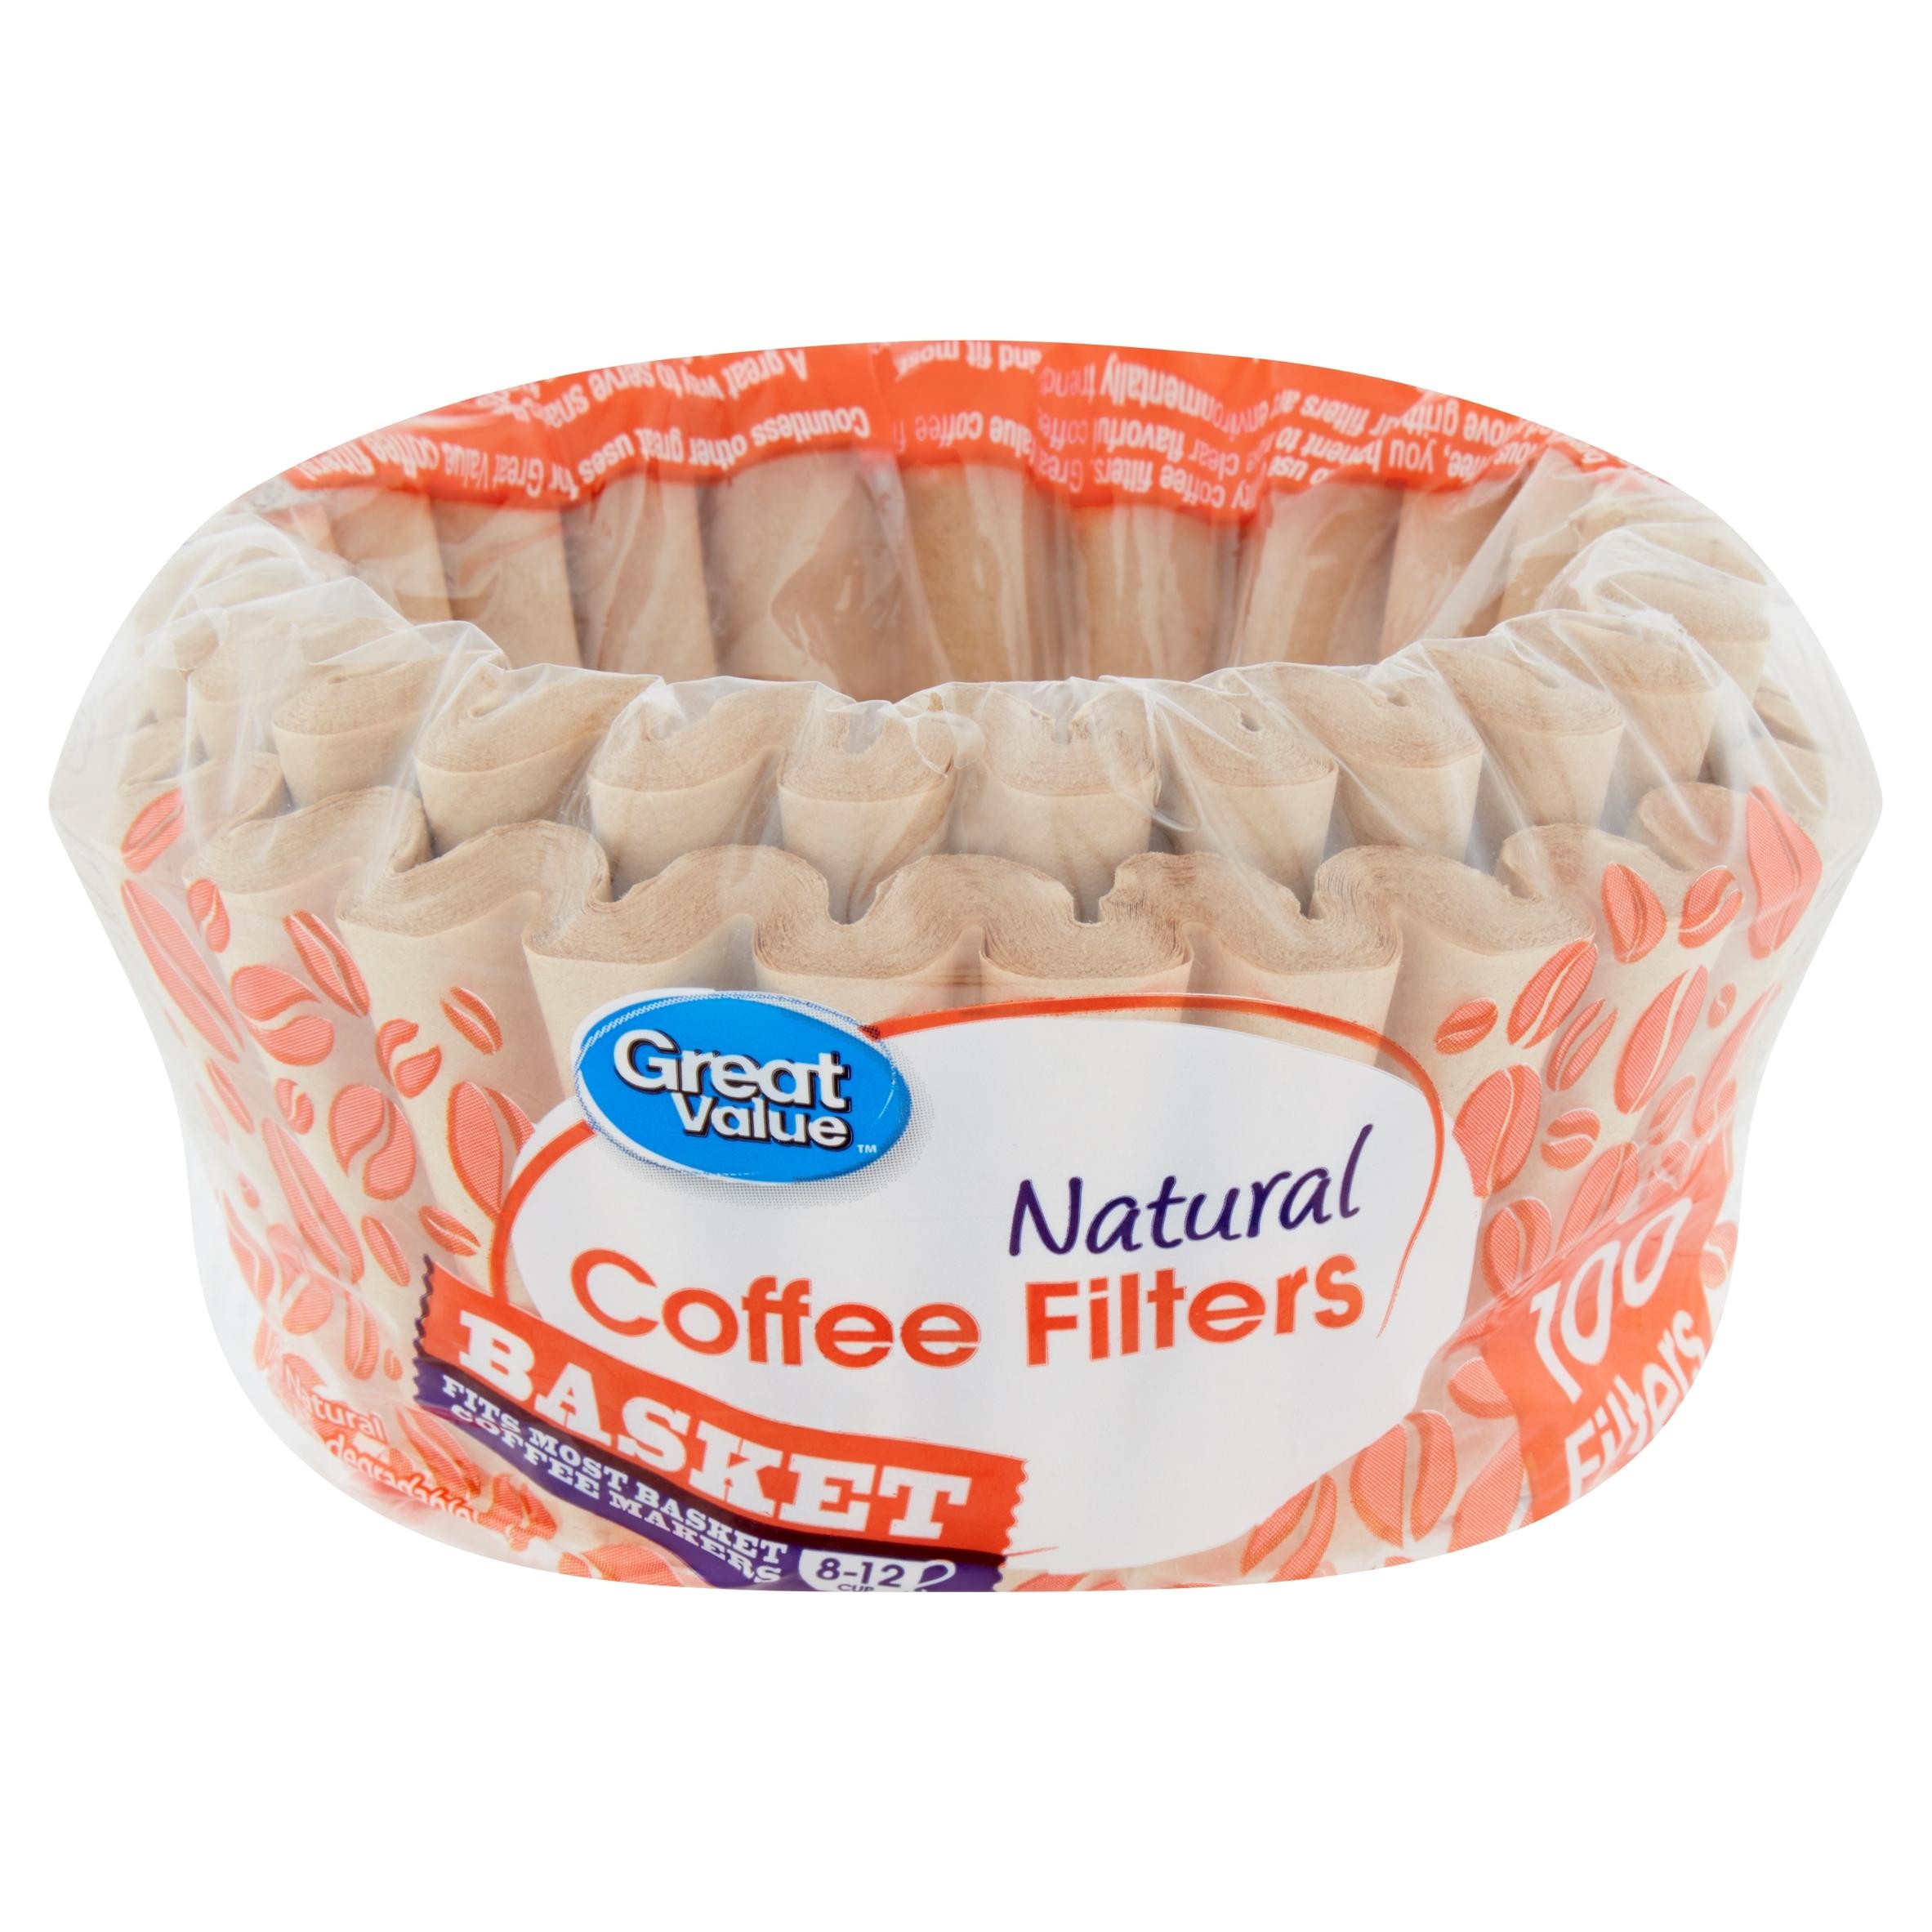 Natural Coffee Filters